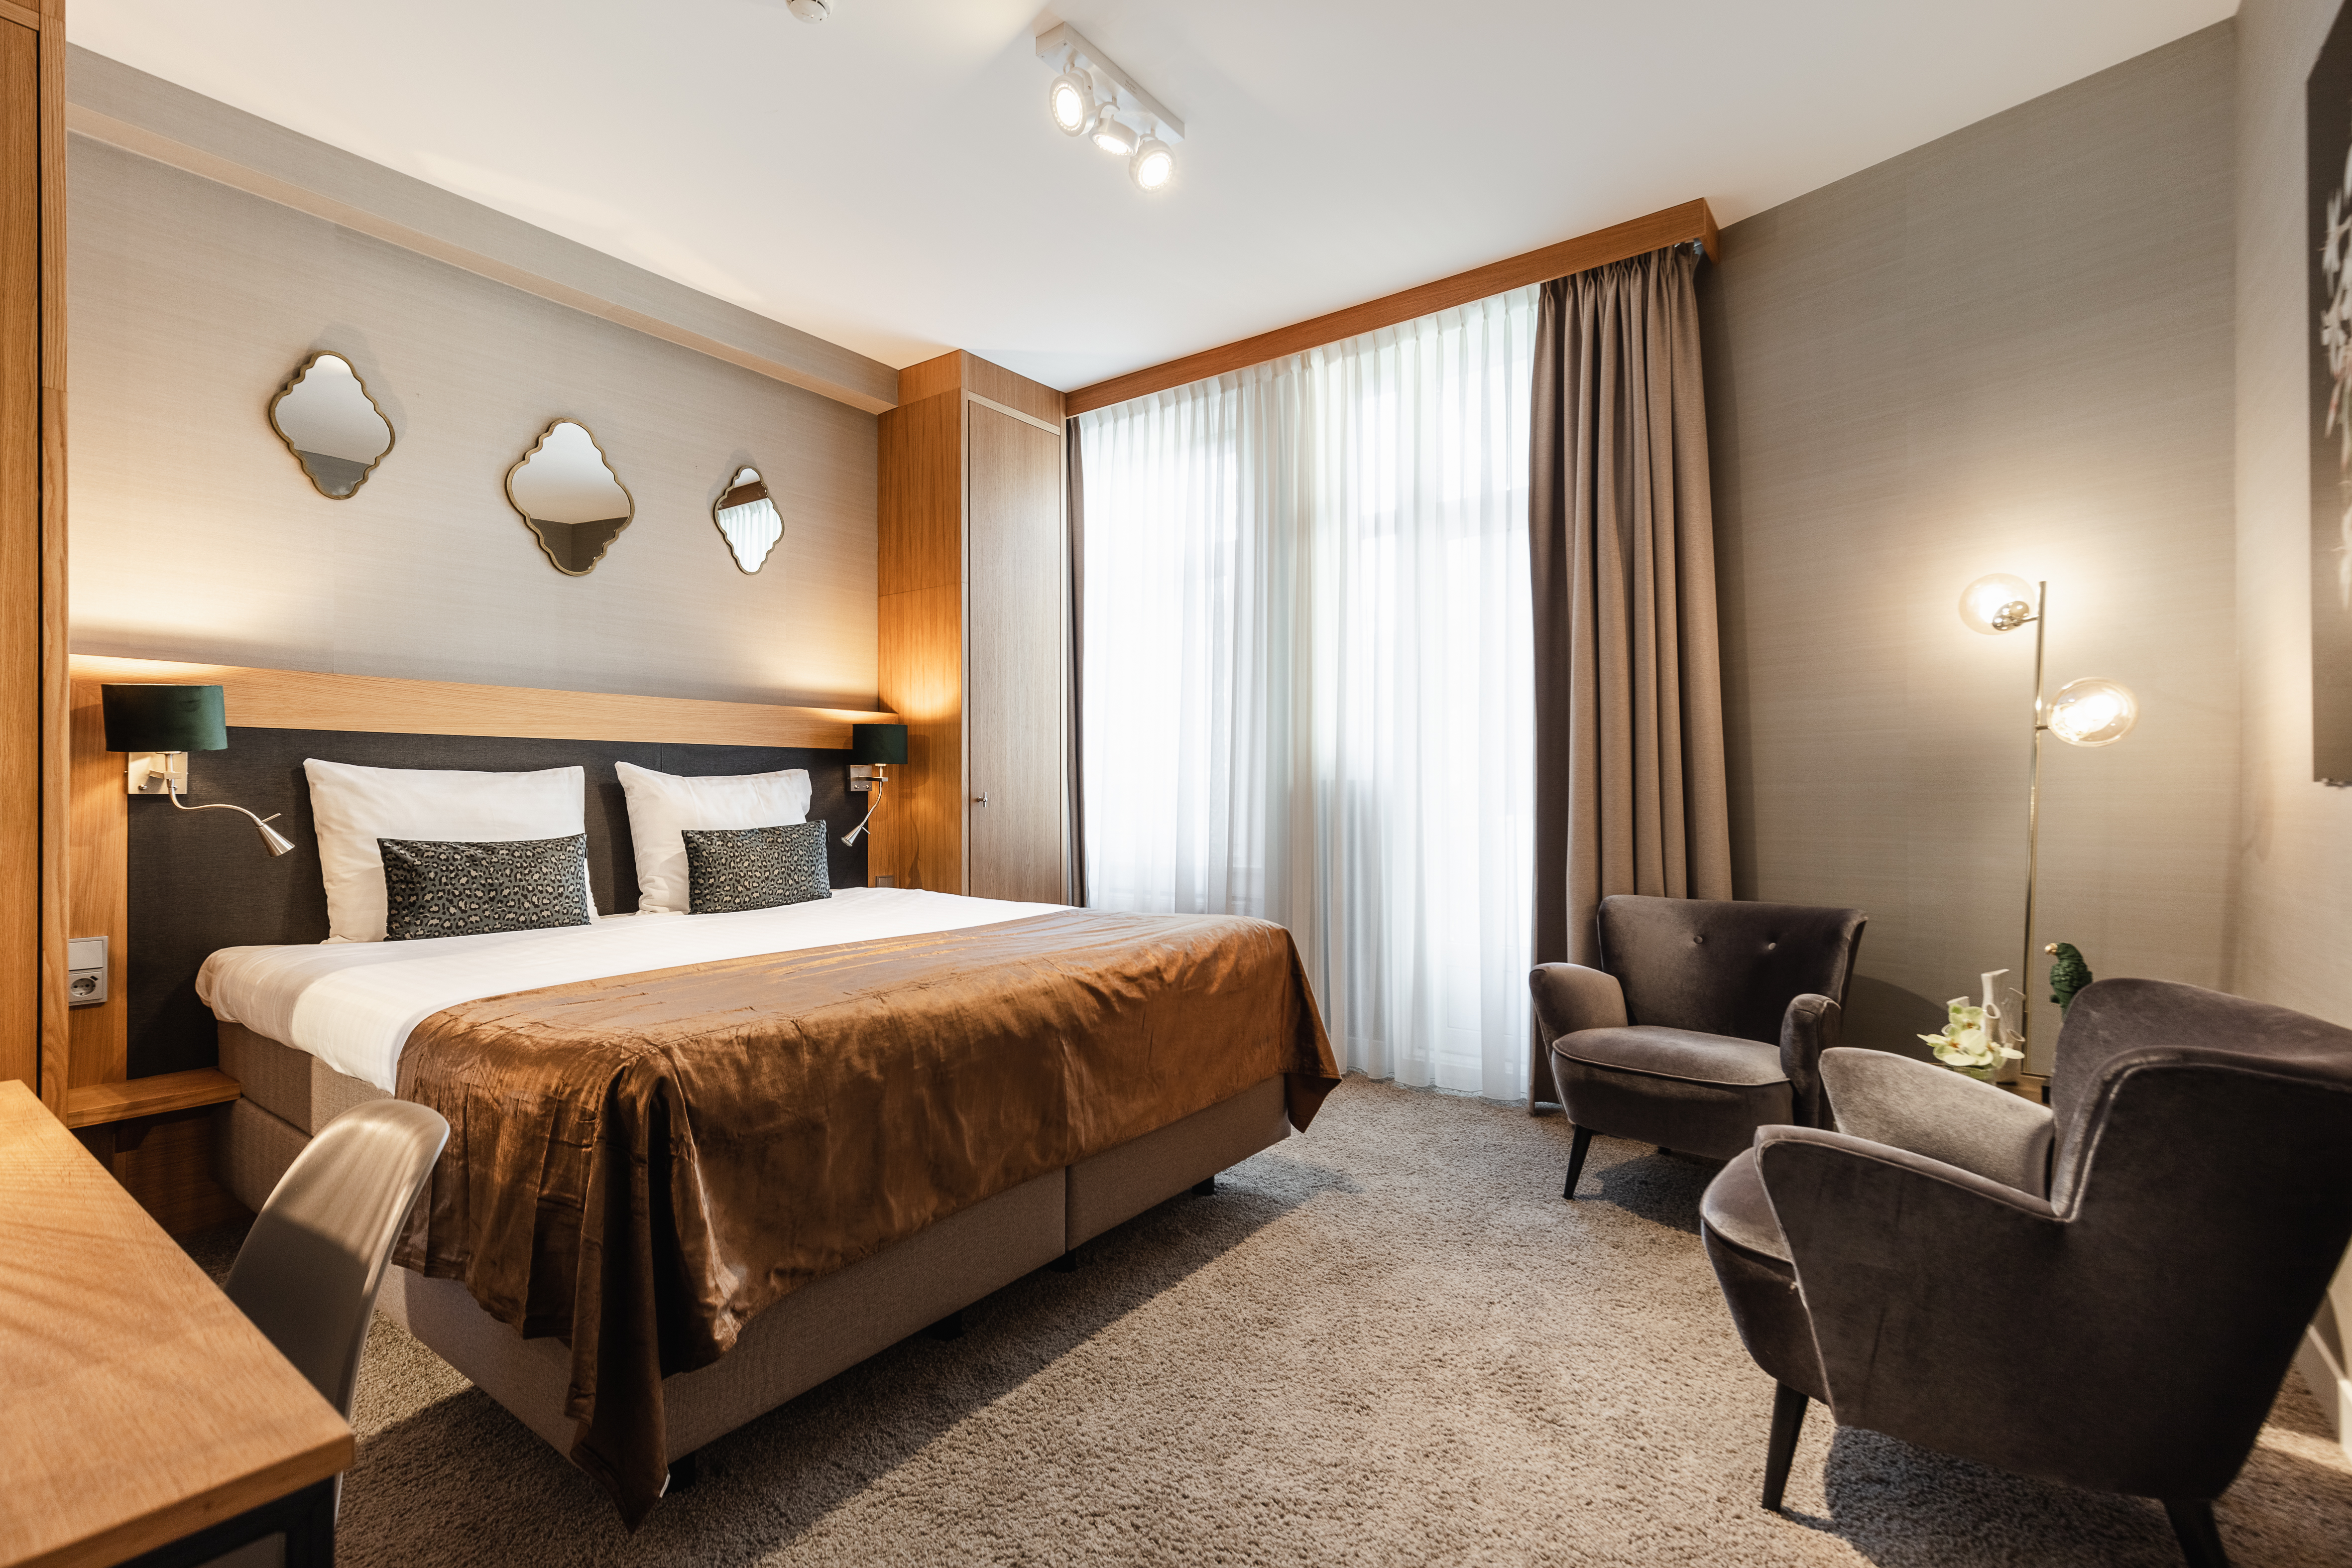 The Delphi-Amsterdam Townhouse Hotel <br/>216.00 ew <br/> <a href='http://vakantieoplossing.nl/outpage/?id=06c24d3aa892235274e6915ea0e7365a' target='_blank'>View Details</a>